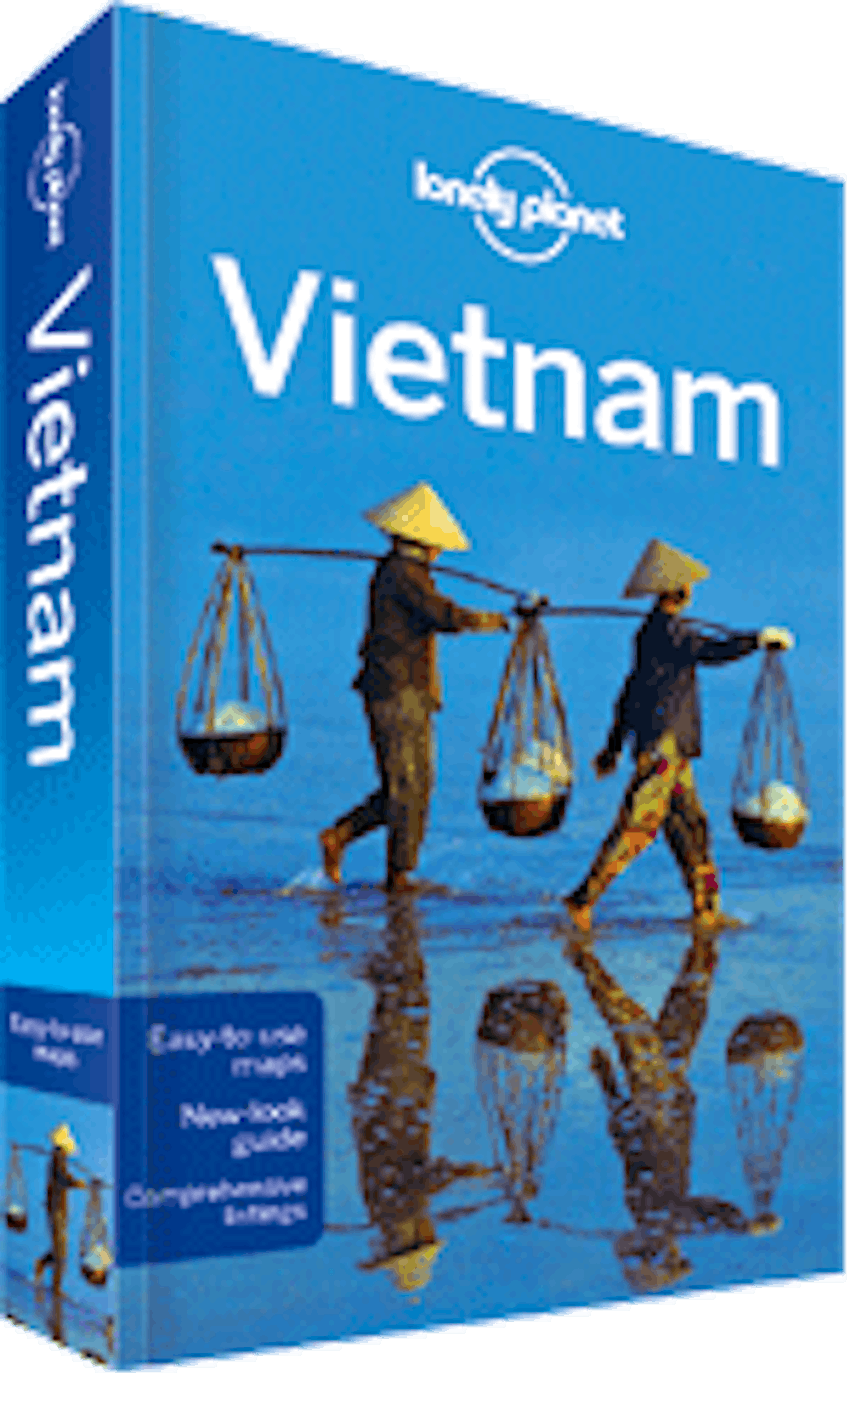 A thrillseeker’s guide to Vietnam Lonely